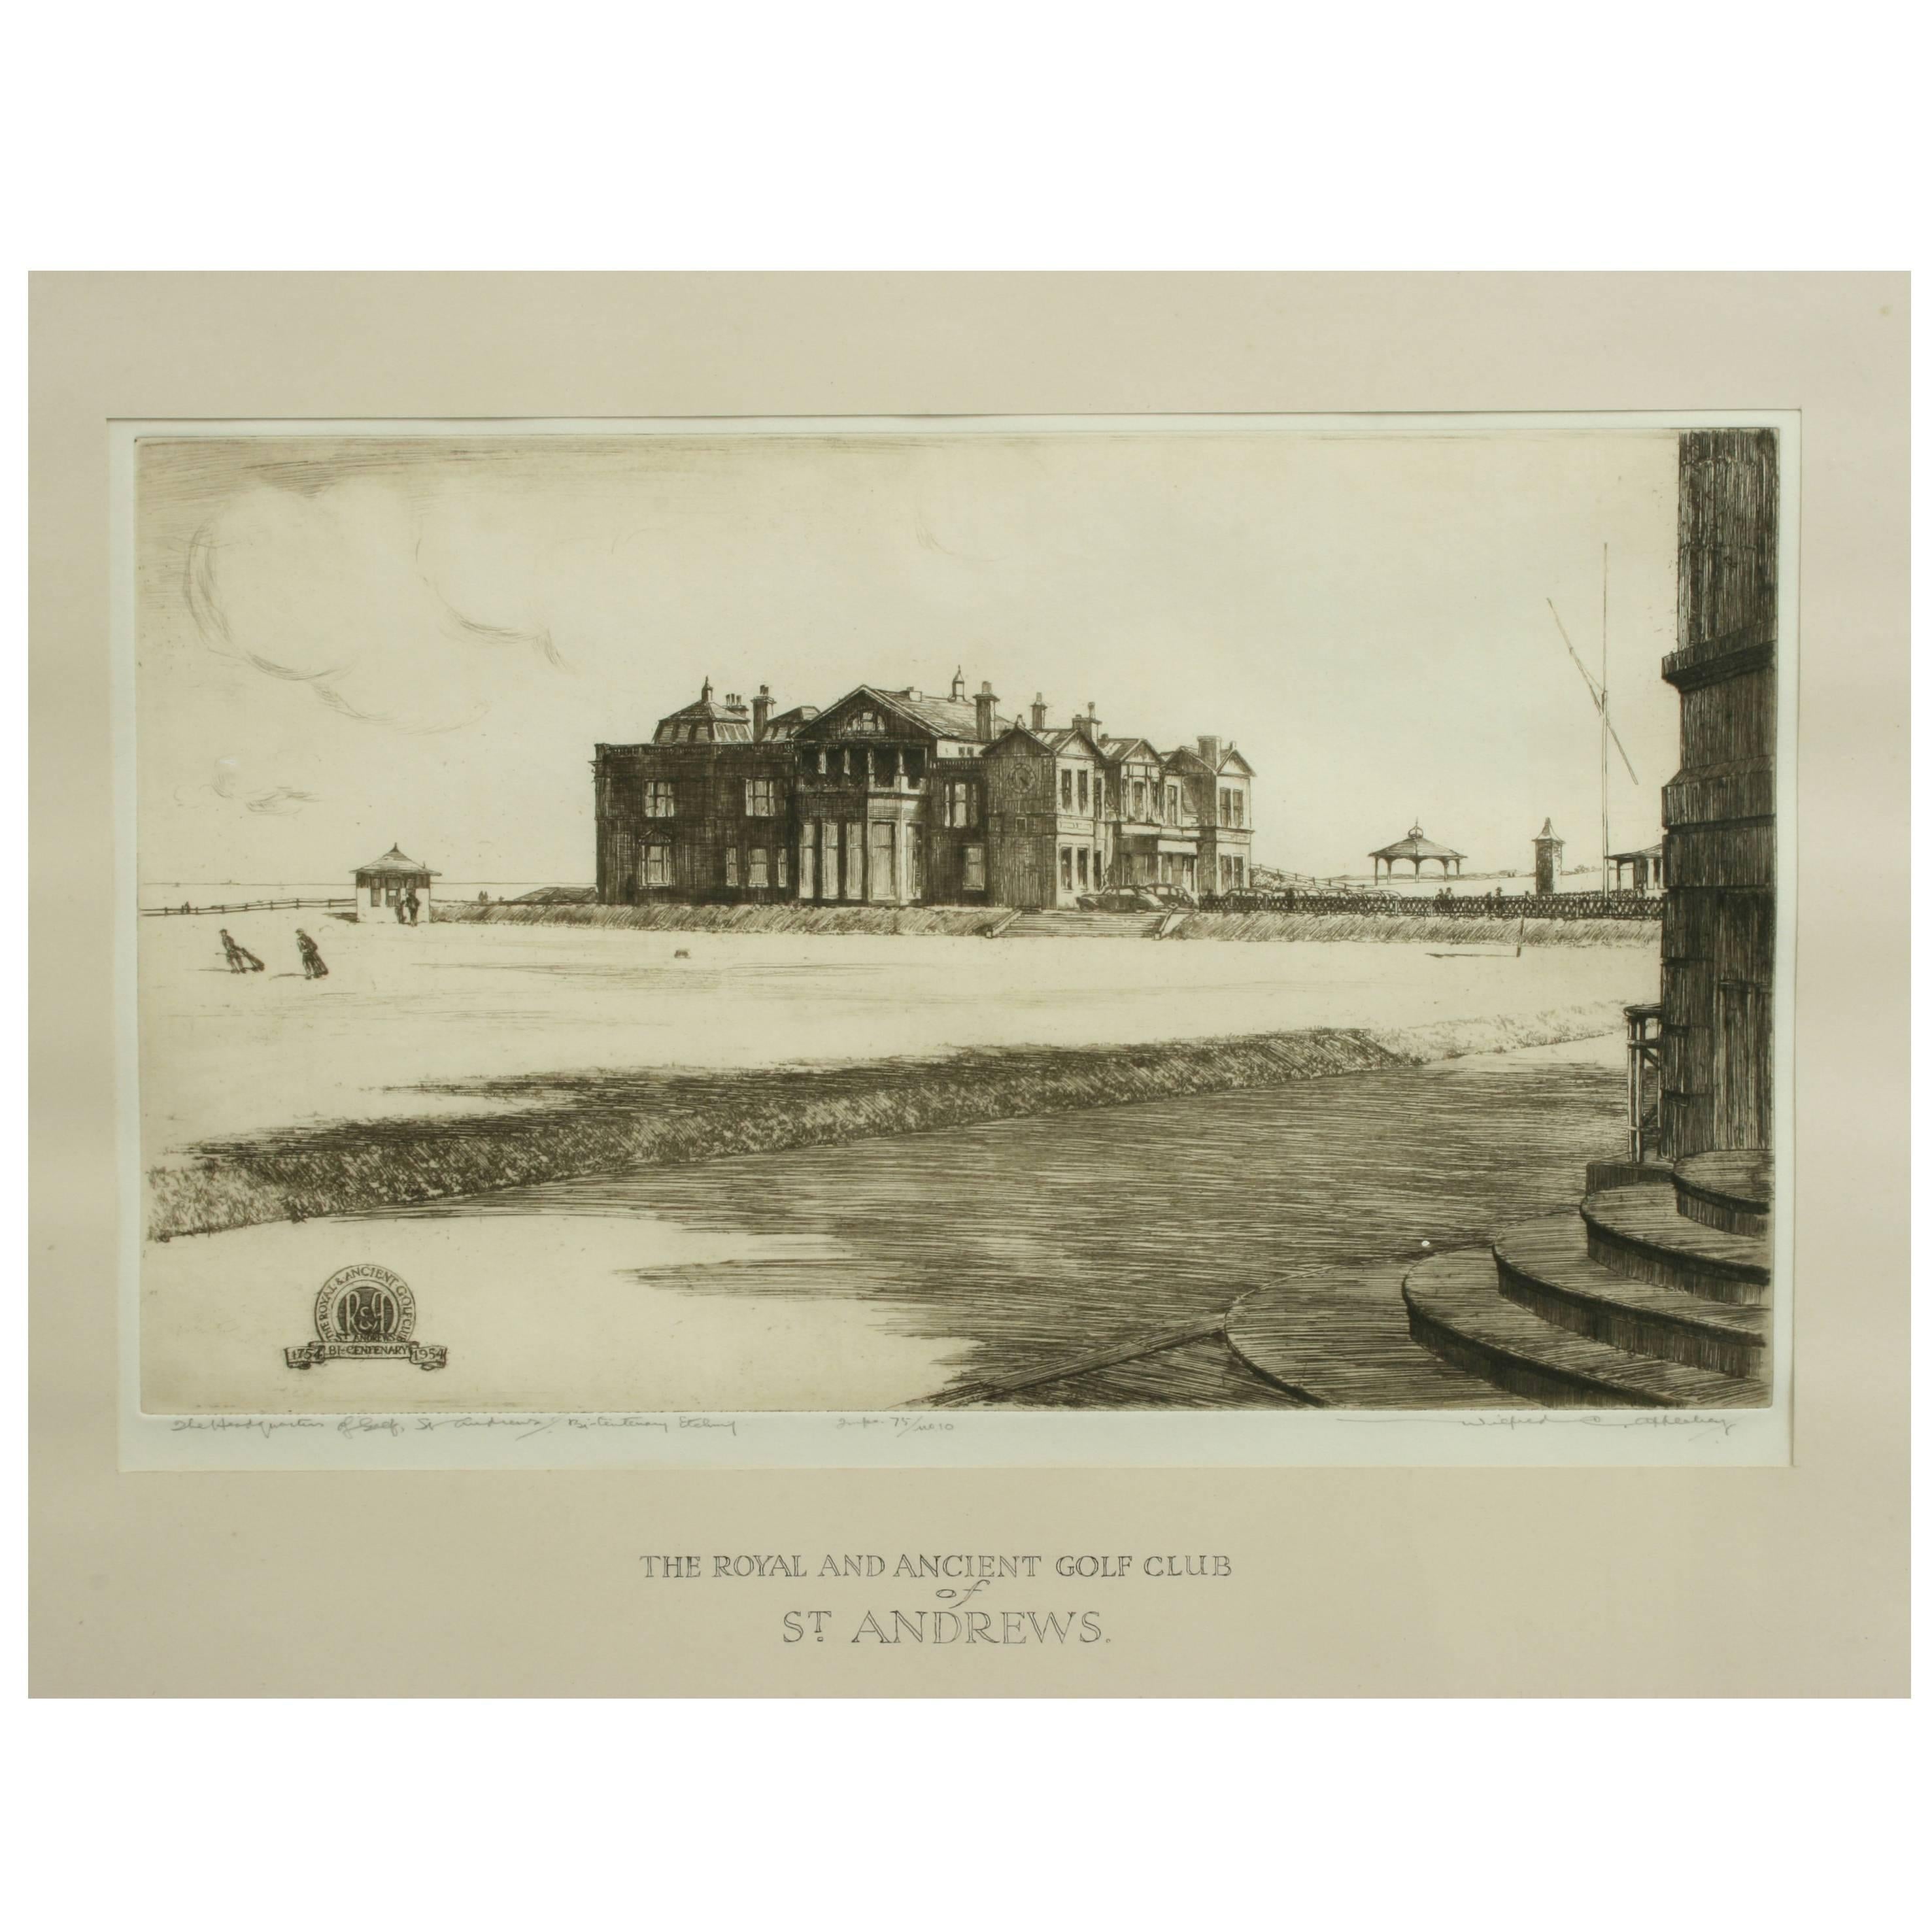 St Andrews golf club bicentenary etching.
A rare etching of the Royal and Ancient Golf Club St Andrews Clubhouse, produced as Ltd. edition for the bicentenary.
This is edition, No. 10/75.
In pencil 